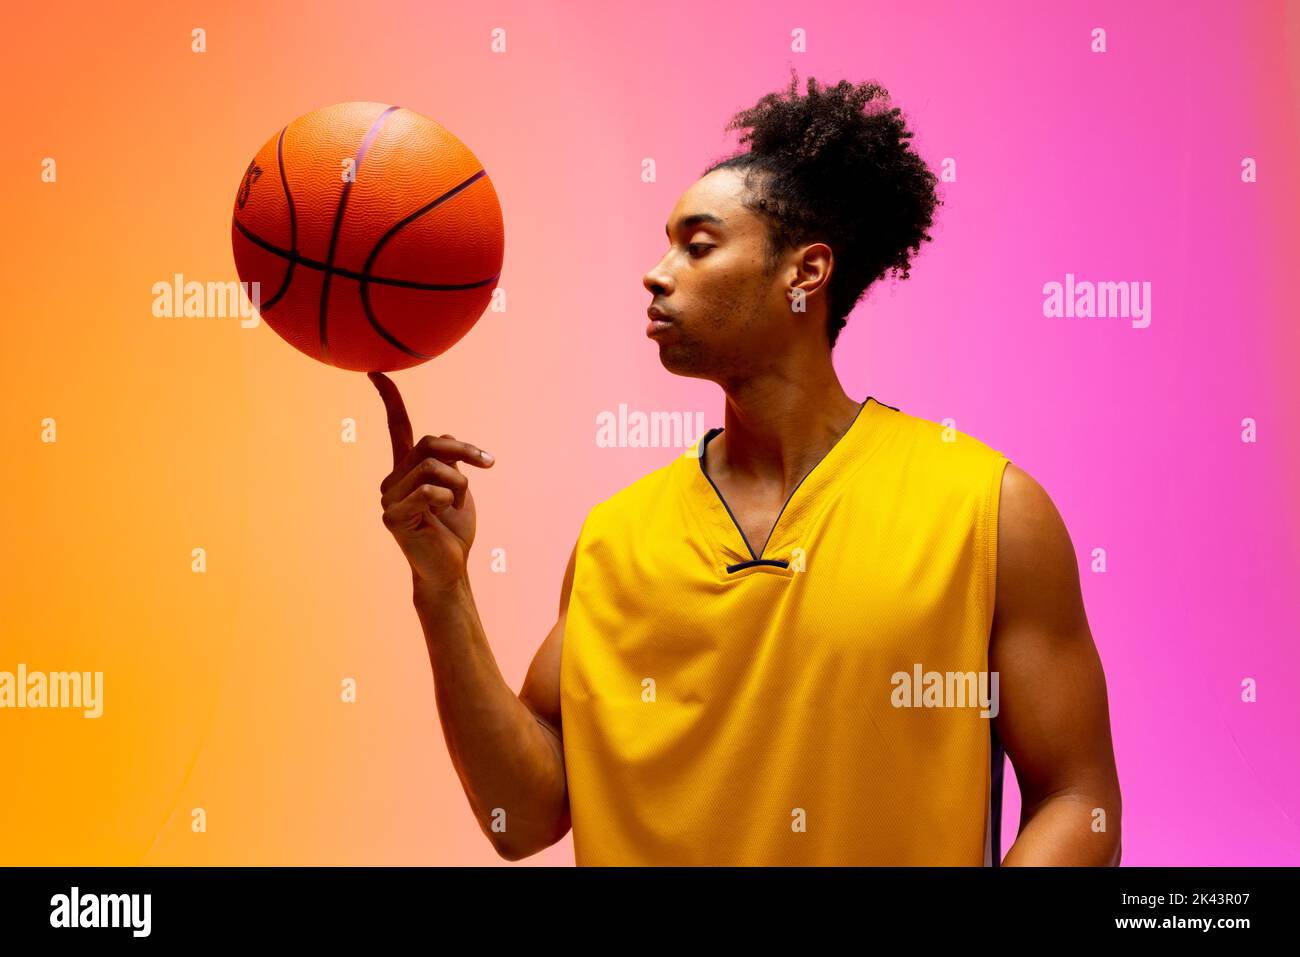 Image of biracial basketball player spinning basketball on pink to orange background. Sports and competition concept. Stock Photo